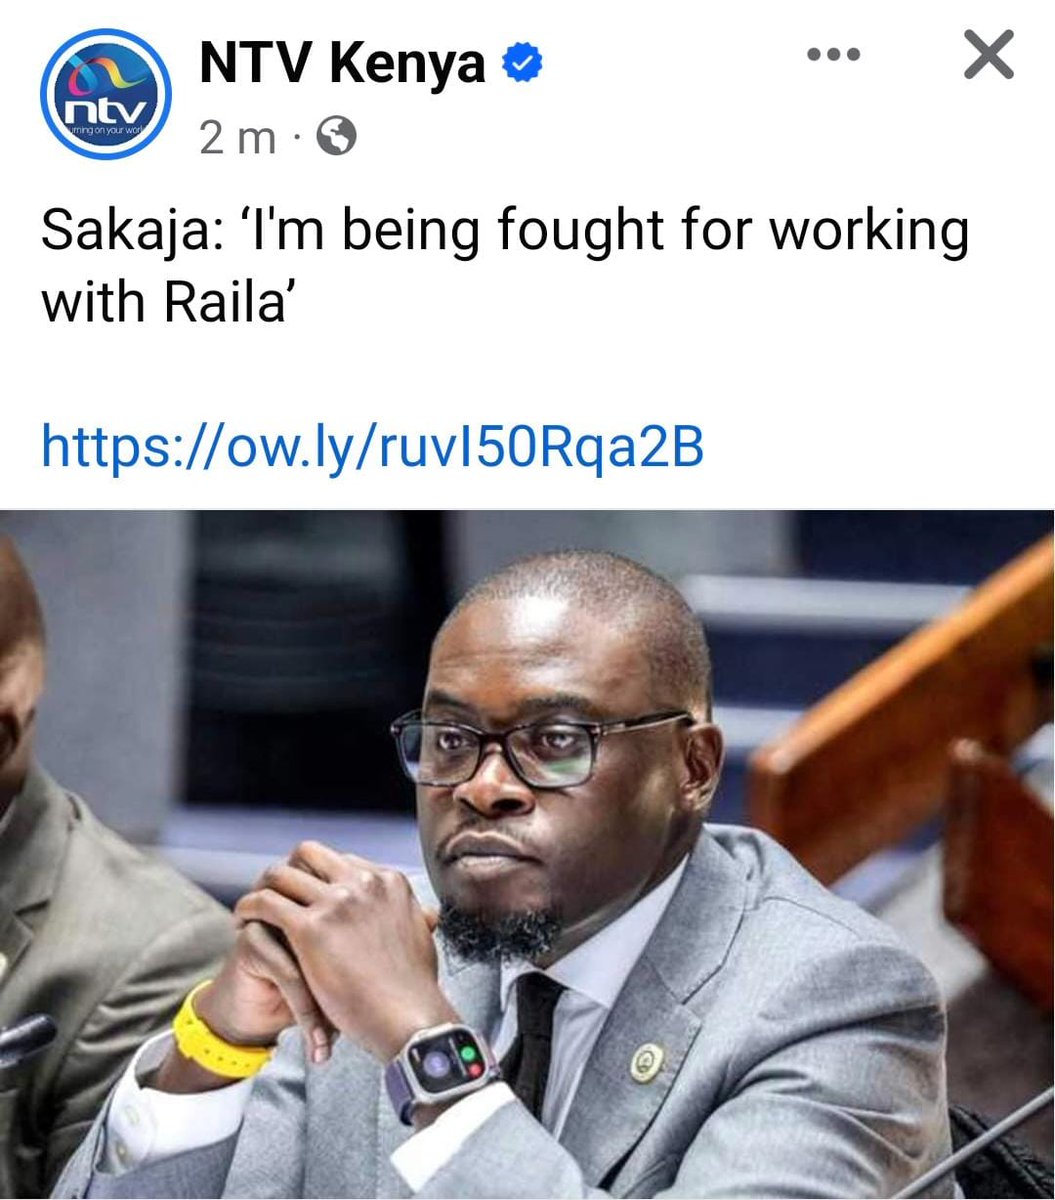 Now that Governor Sakaja has stated that he's being fought because he's working with Raila, I'm bound to ask... 1. Who exactly is fighting the Nairobi Governor 2. What work exactly is he doing with Raila Thanks in advance for the Clarification!